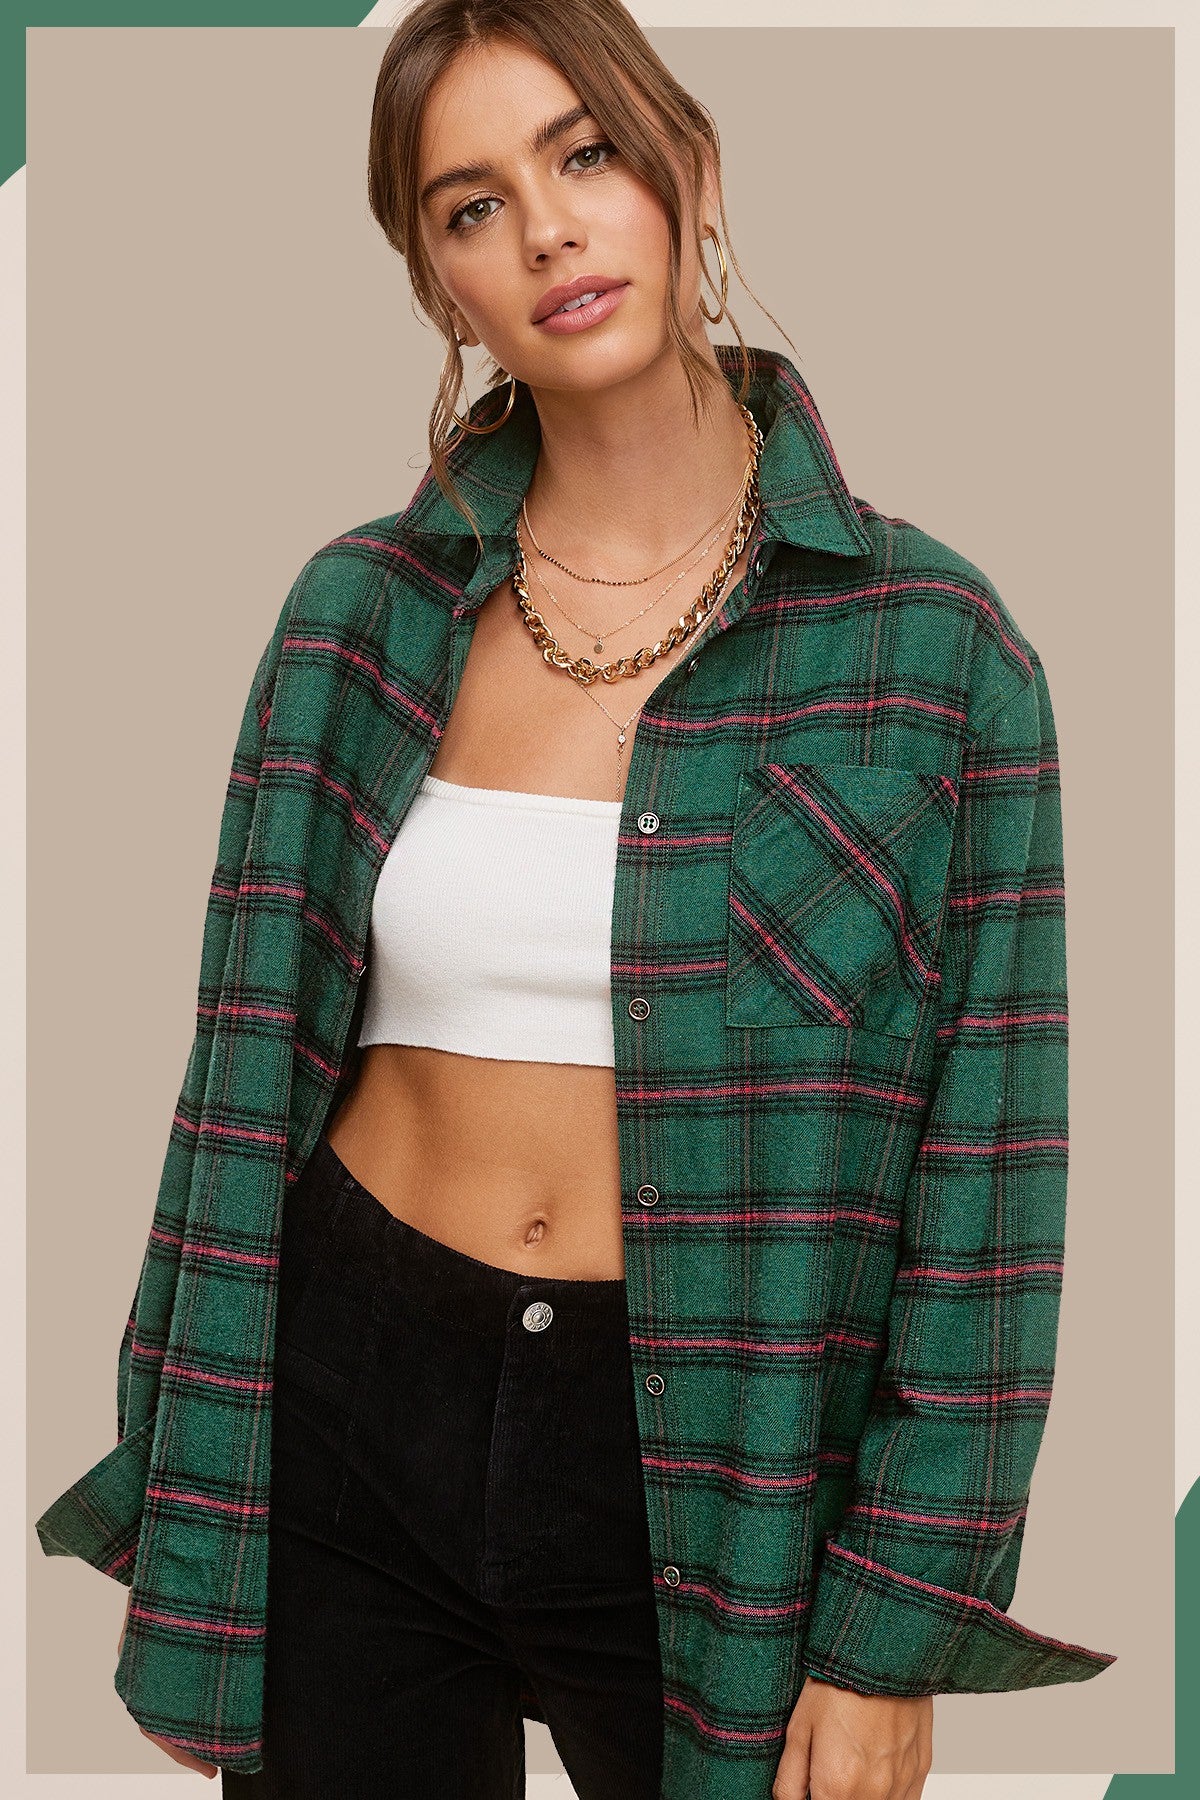 The Campbell Plaid Flannel